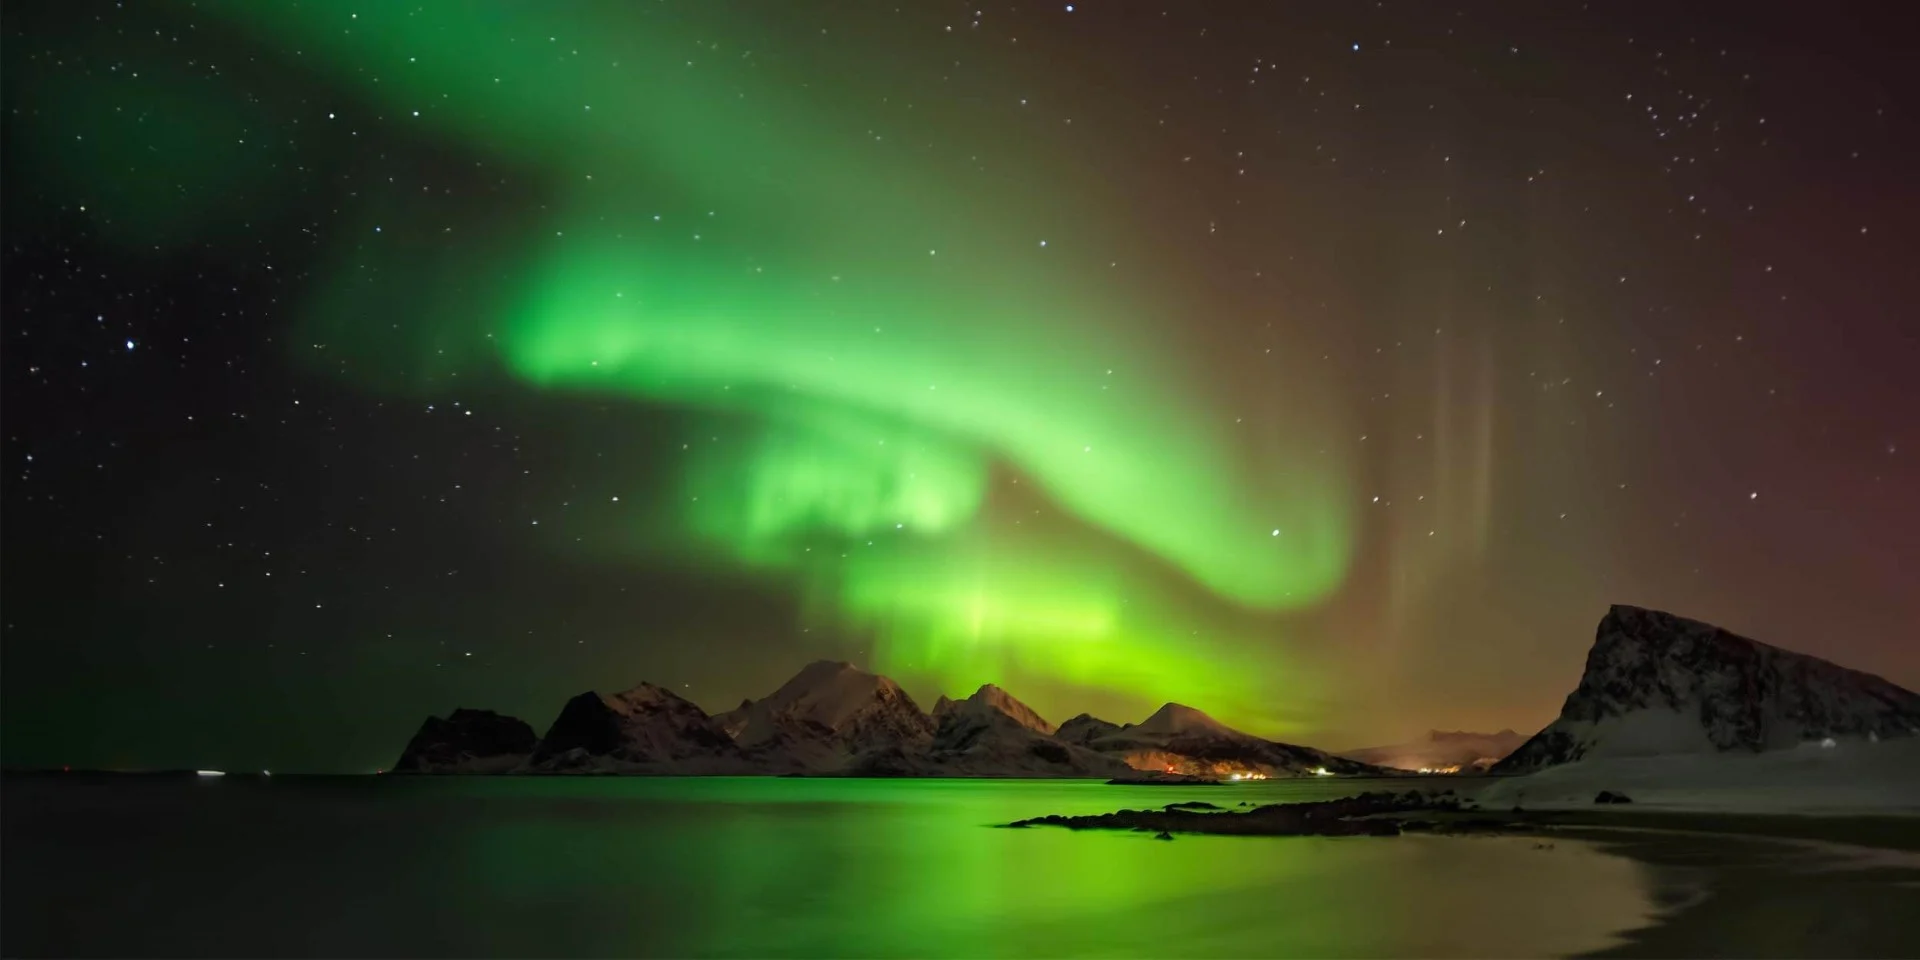 What causes the Northern Lights?